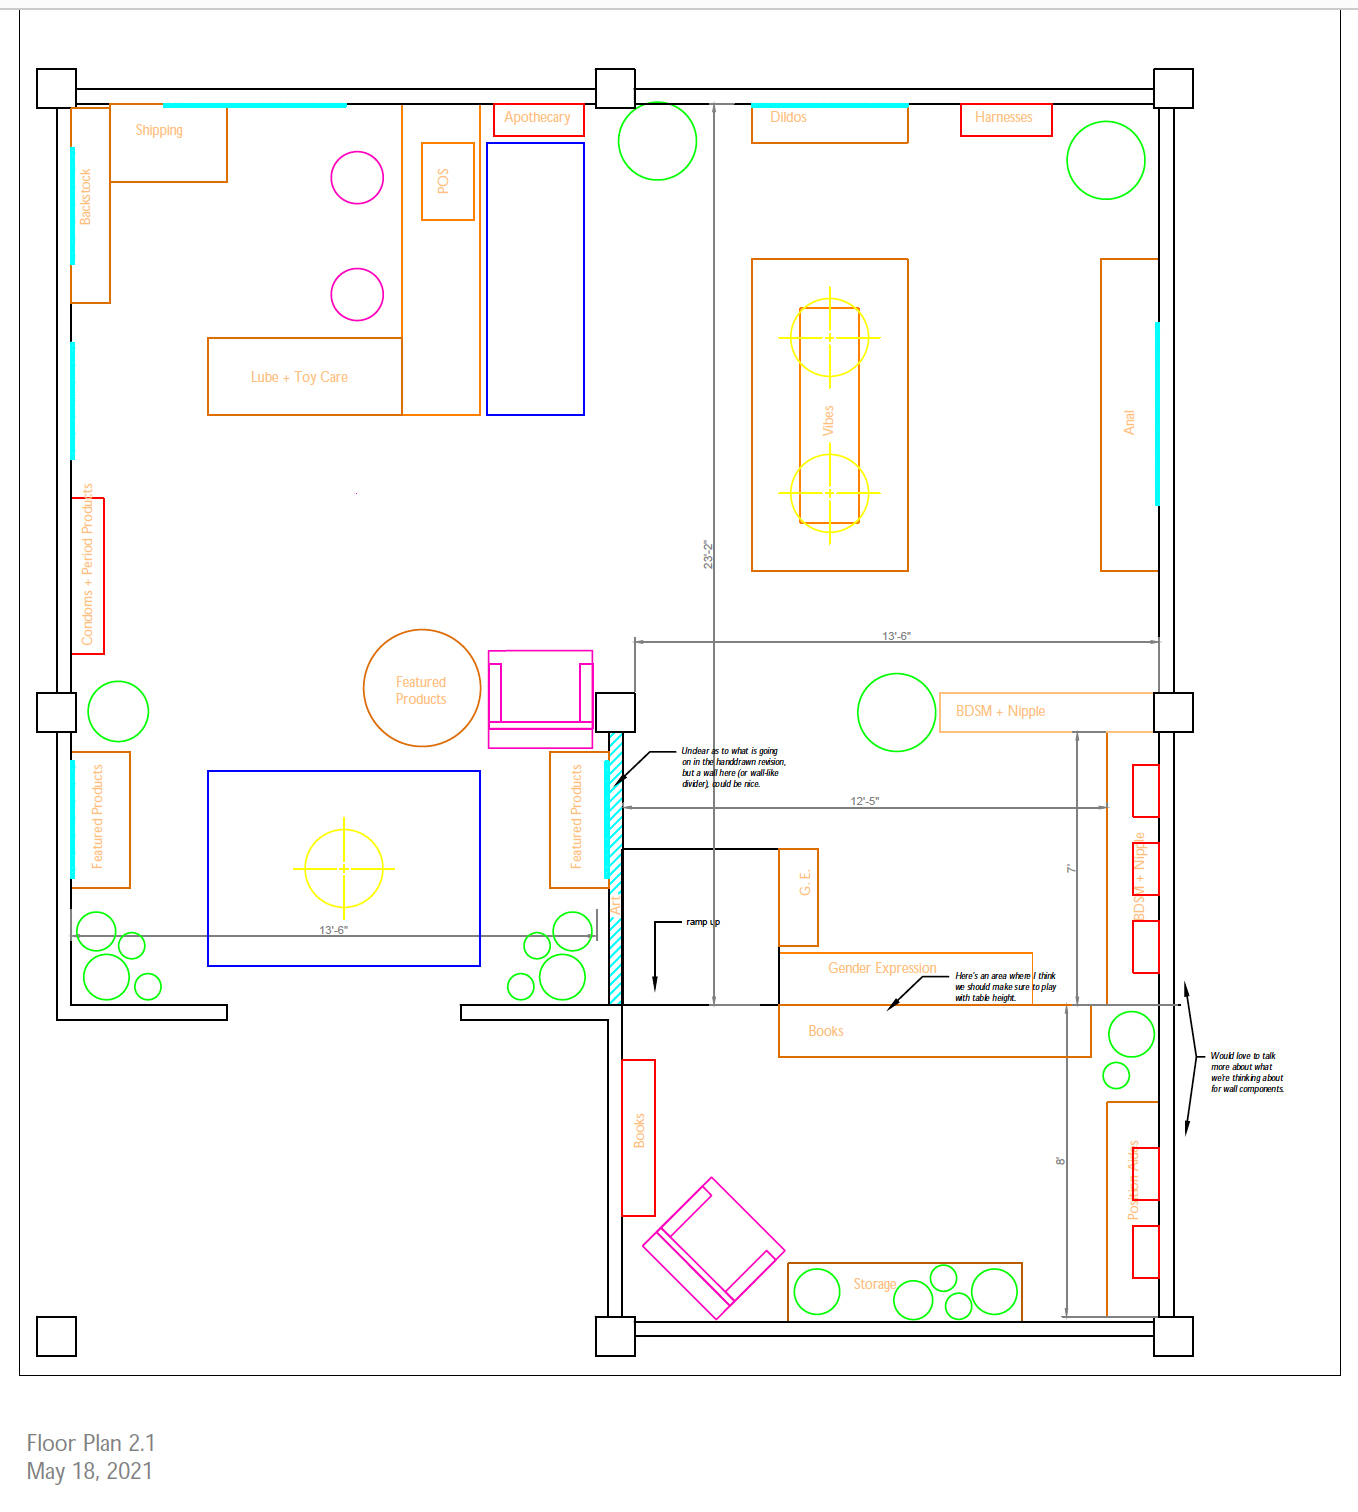 Floor plan for the store